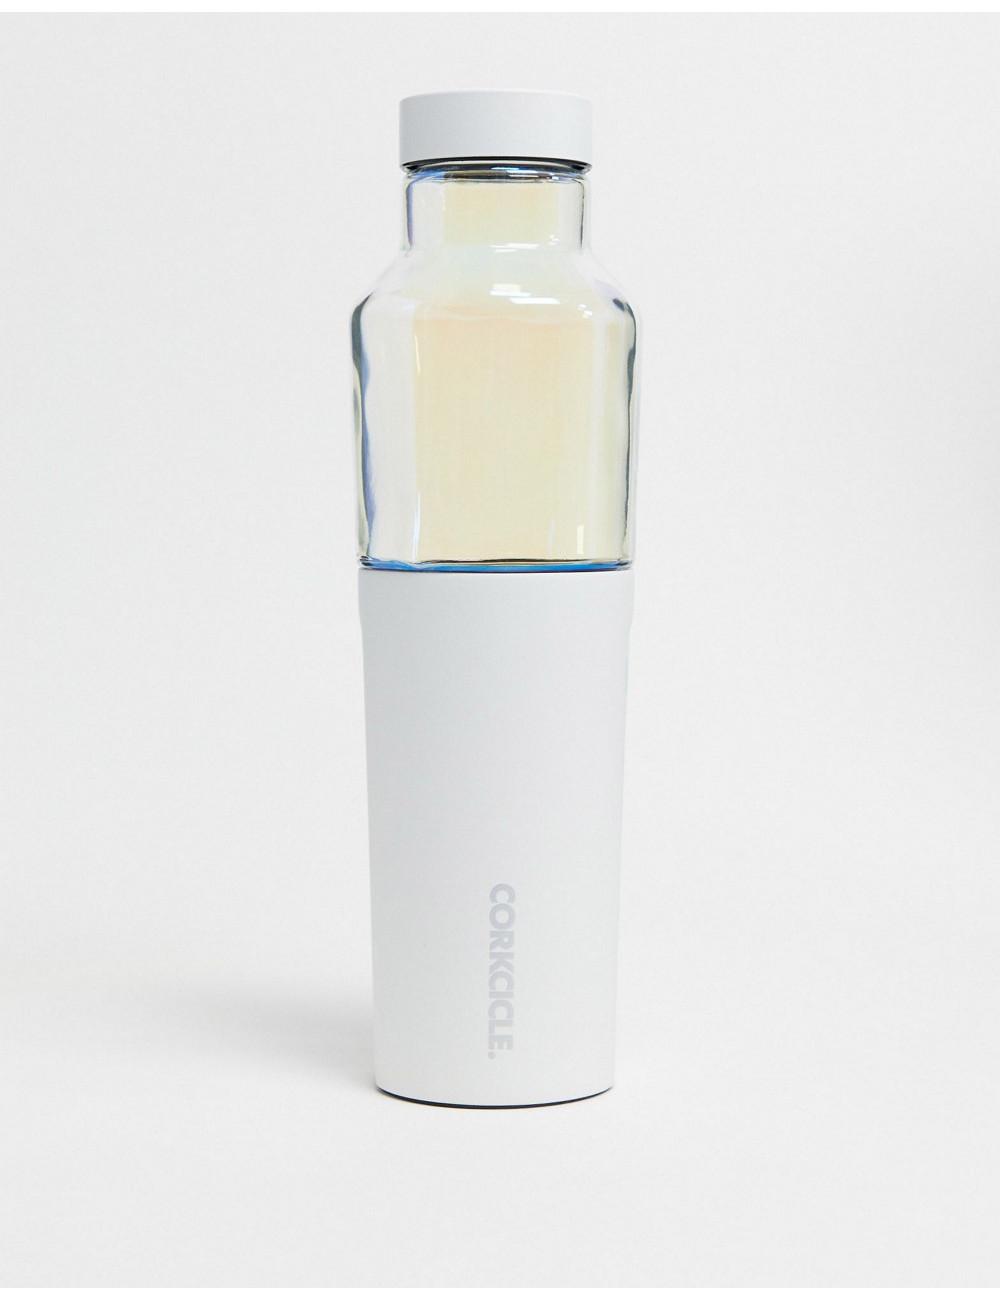 Corkcicle hybrid and clear...